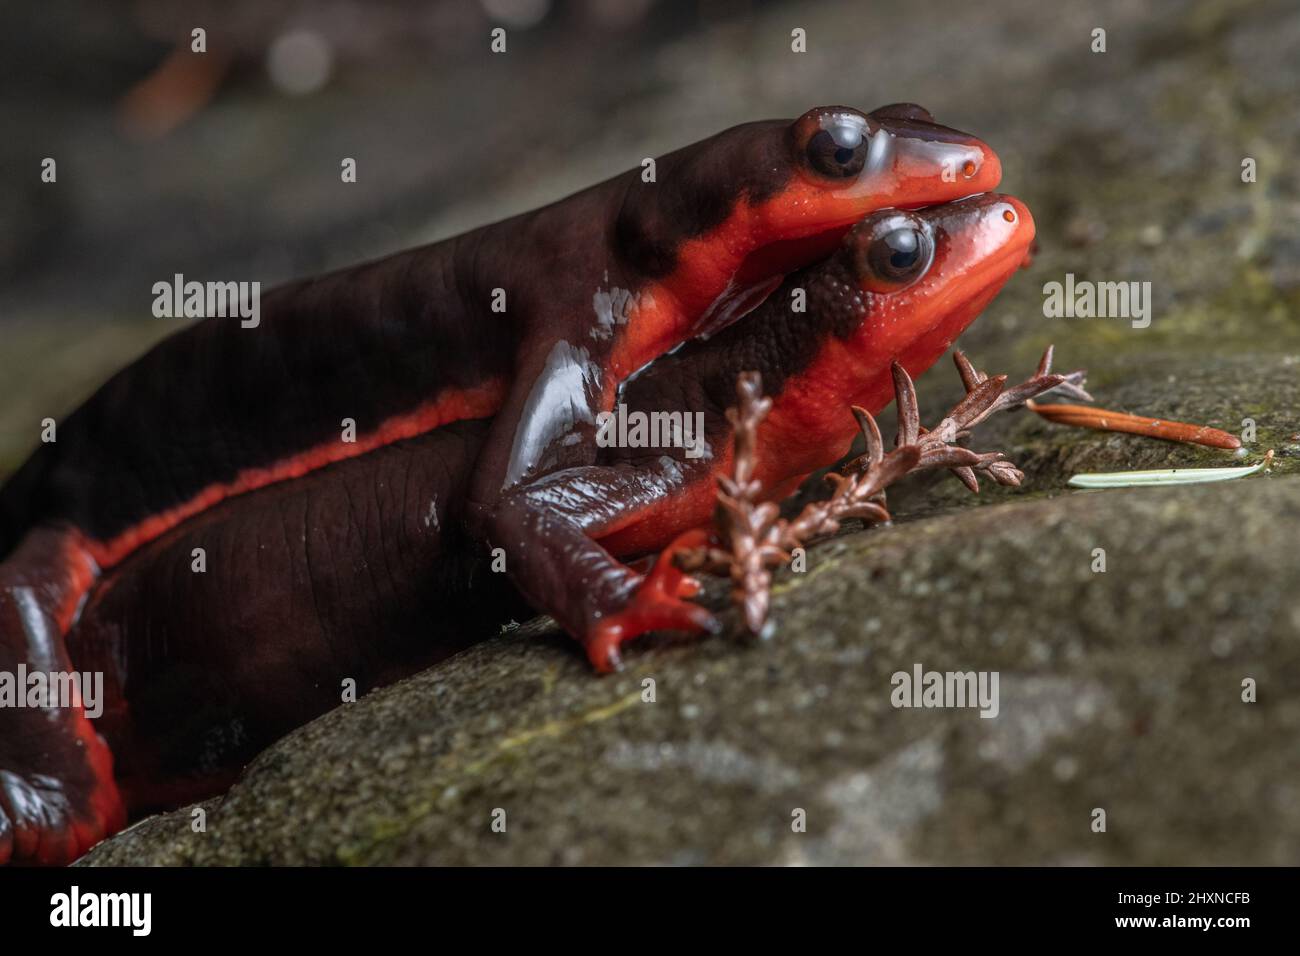 A pair of red bellied newts (Taricha torosa) in amplexus. The amphibians crawl across a rock in Northern California. Stock Photo